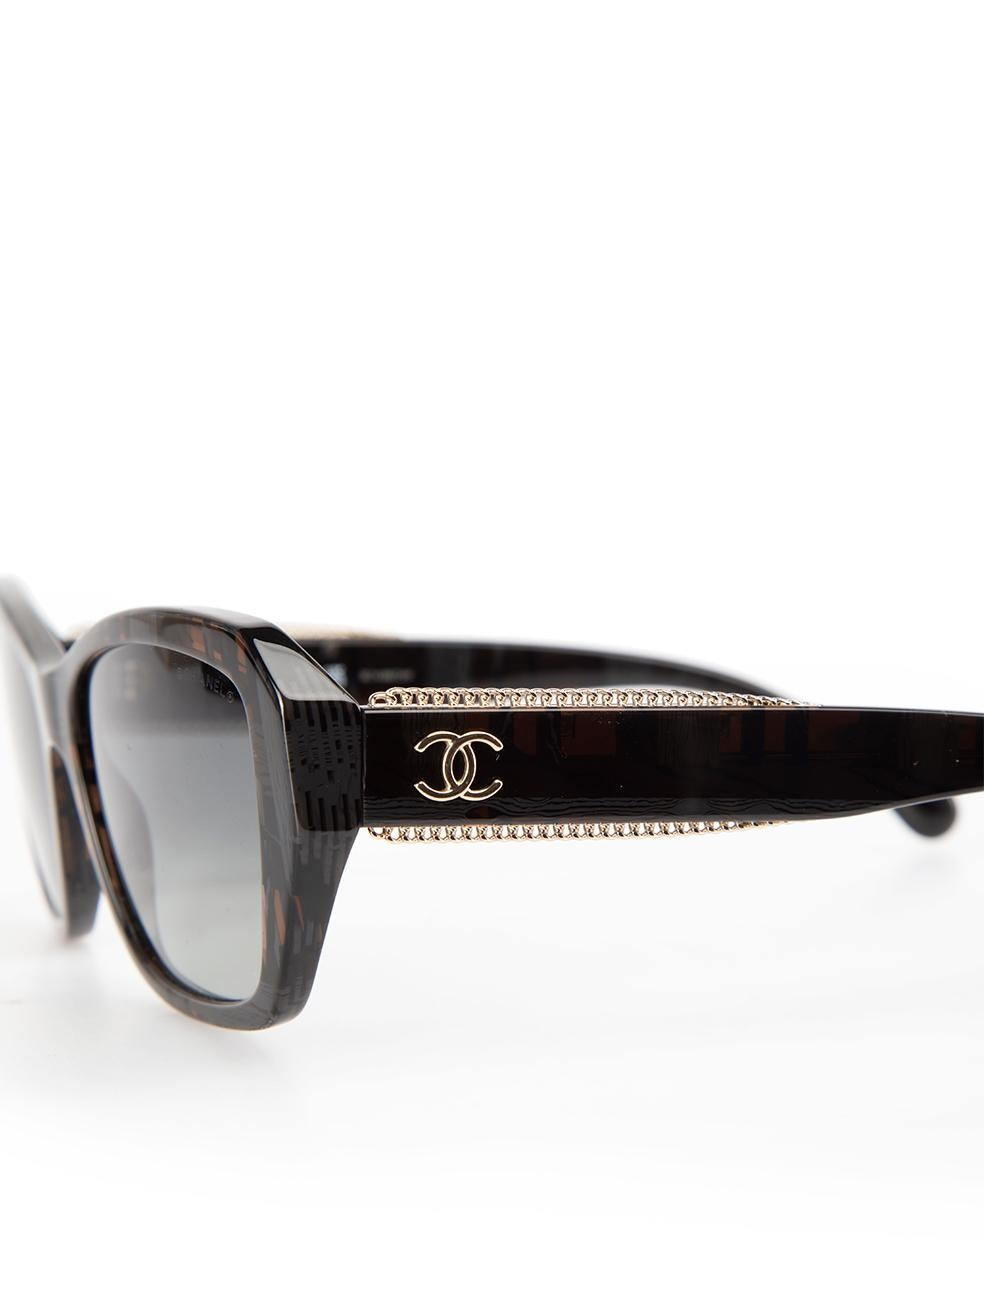 Chanel Black Butterfly Grey Gradient Sunglasses For Sale 2